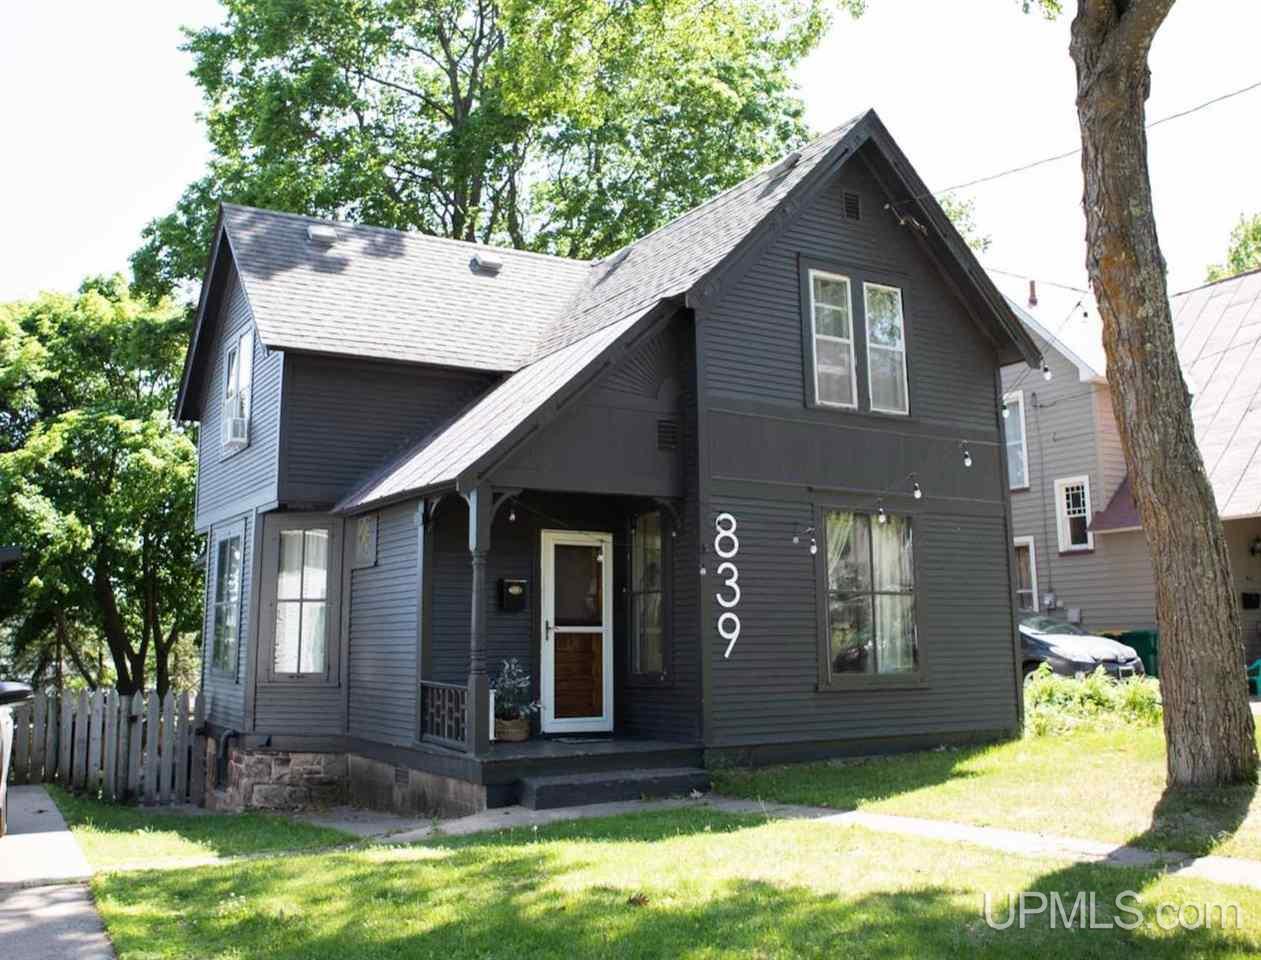 Here's your chance to own a beautiful historic home in the City of Marquette. Centrally located close to downtown, you are close to parks, shopping, restaurants and the food co-op. You'll appreciate this home's high ceilings, wood floors, and abundant natural light. The extra large living space also features a supplemental gas heating stove, perfect for creating a cozy environment during a Marquette winter. Upstairs you'll find all 4 bedrooms along with your laundry room. No more lugging baskets downstairs! The basement with half bath walks out to a huge fenced in yard making for easy access. Storage shed on the property houses a snowblower and lawn mower which are also included in the purchase! All that's left is for you to move in!